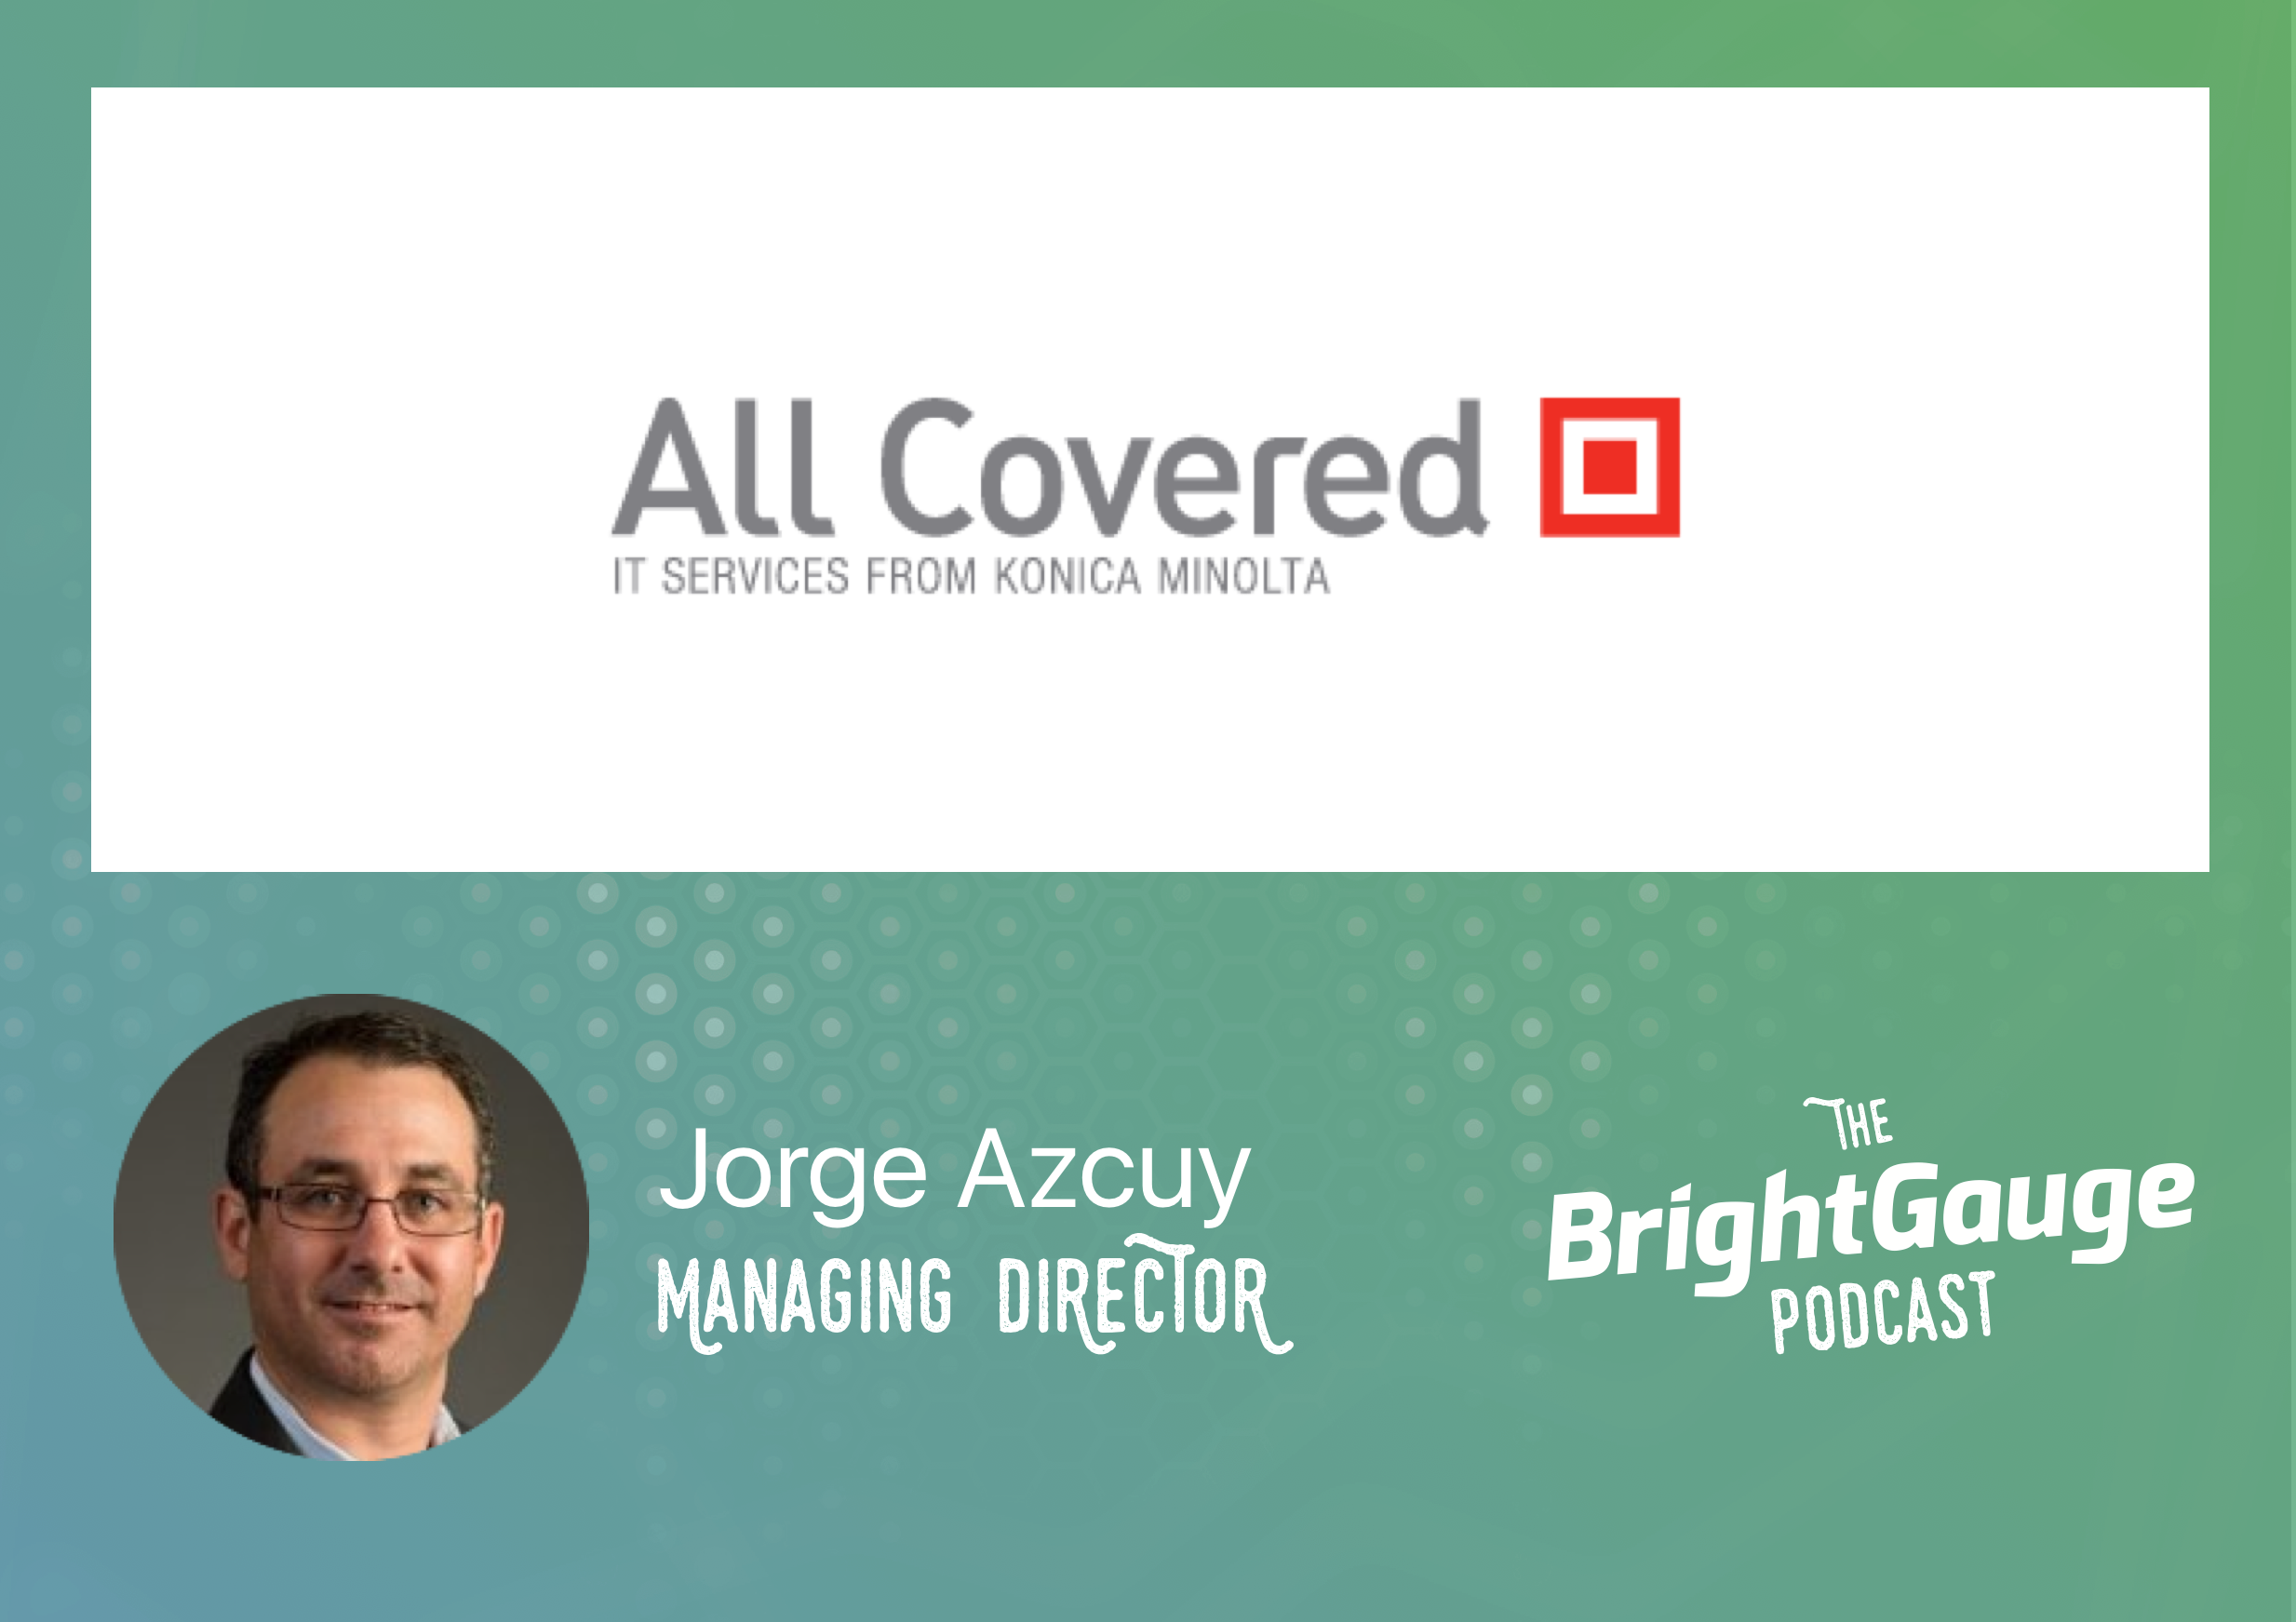 [Podcast] Episode 4 with Jorge Azcuy of All Covered